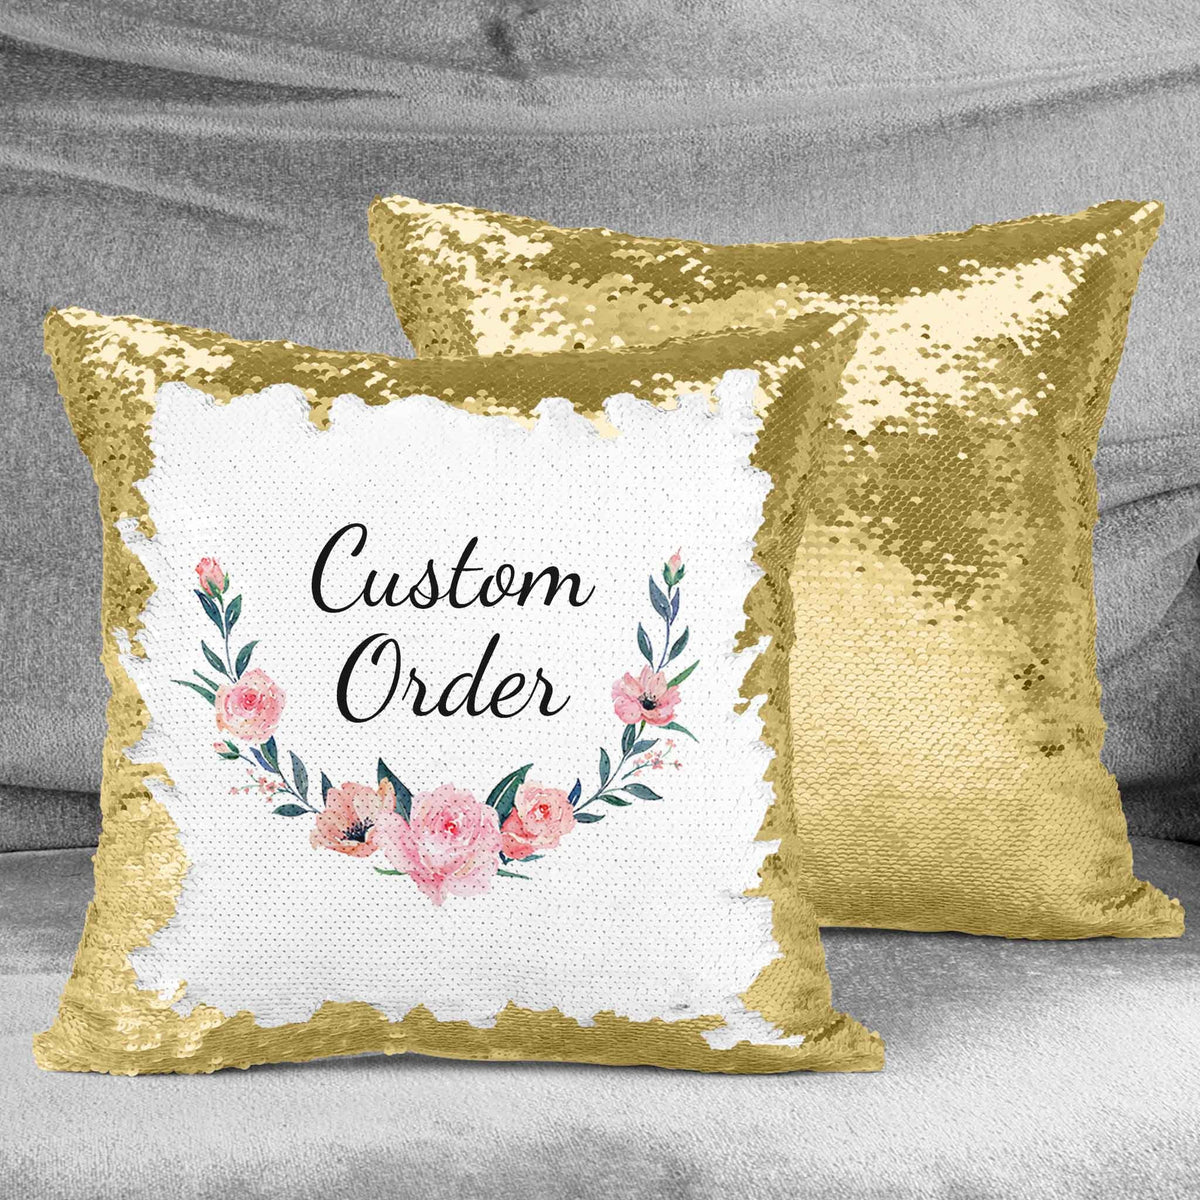 Personalized Pillow Pillow With Photo Personalized Throw Pillow